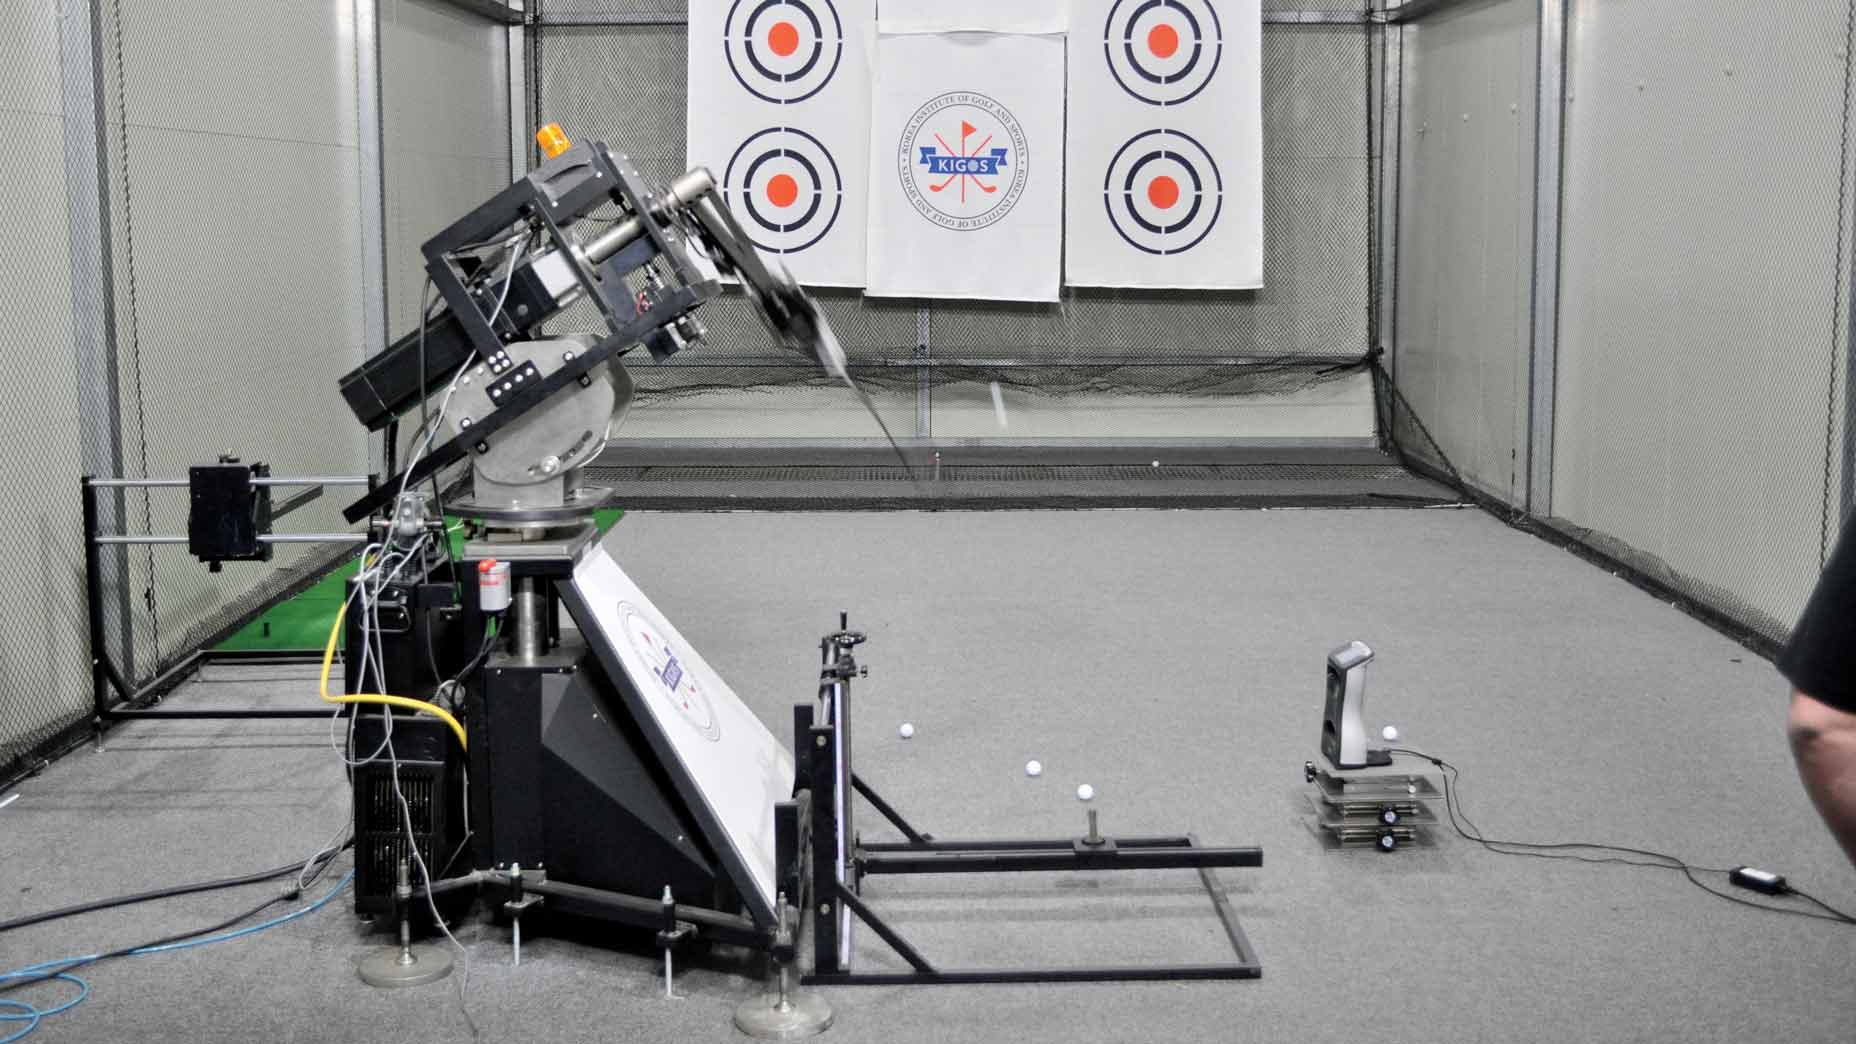 Why squaring clubface is so important, according to the ClubTest robot